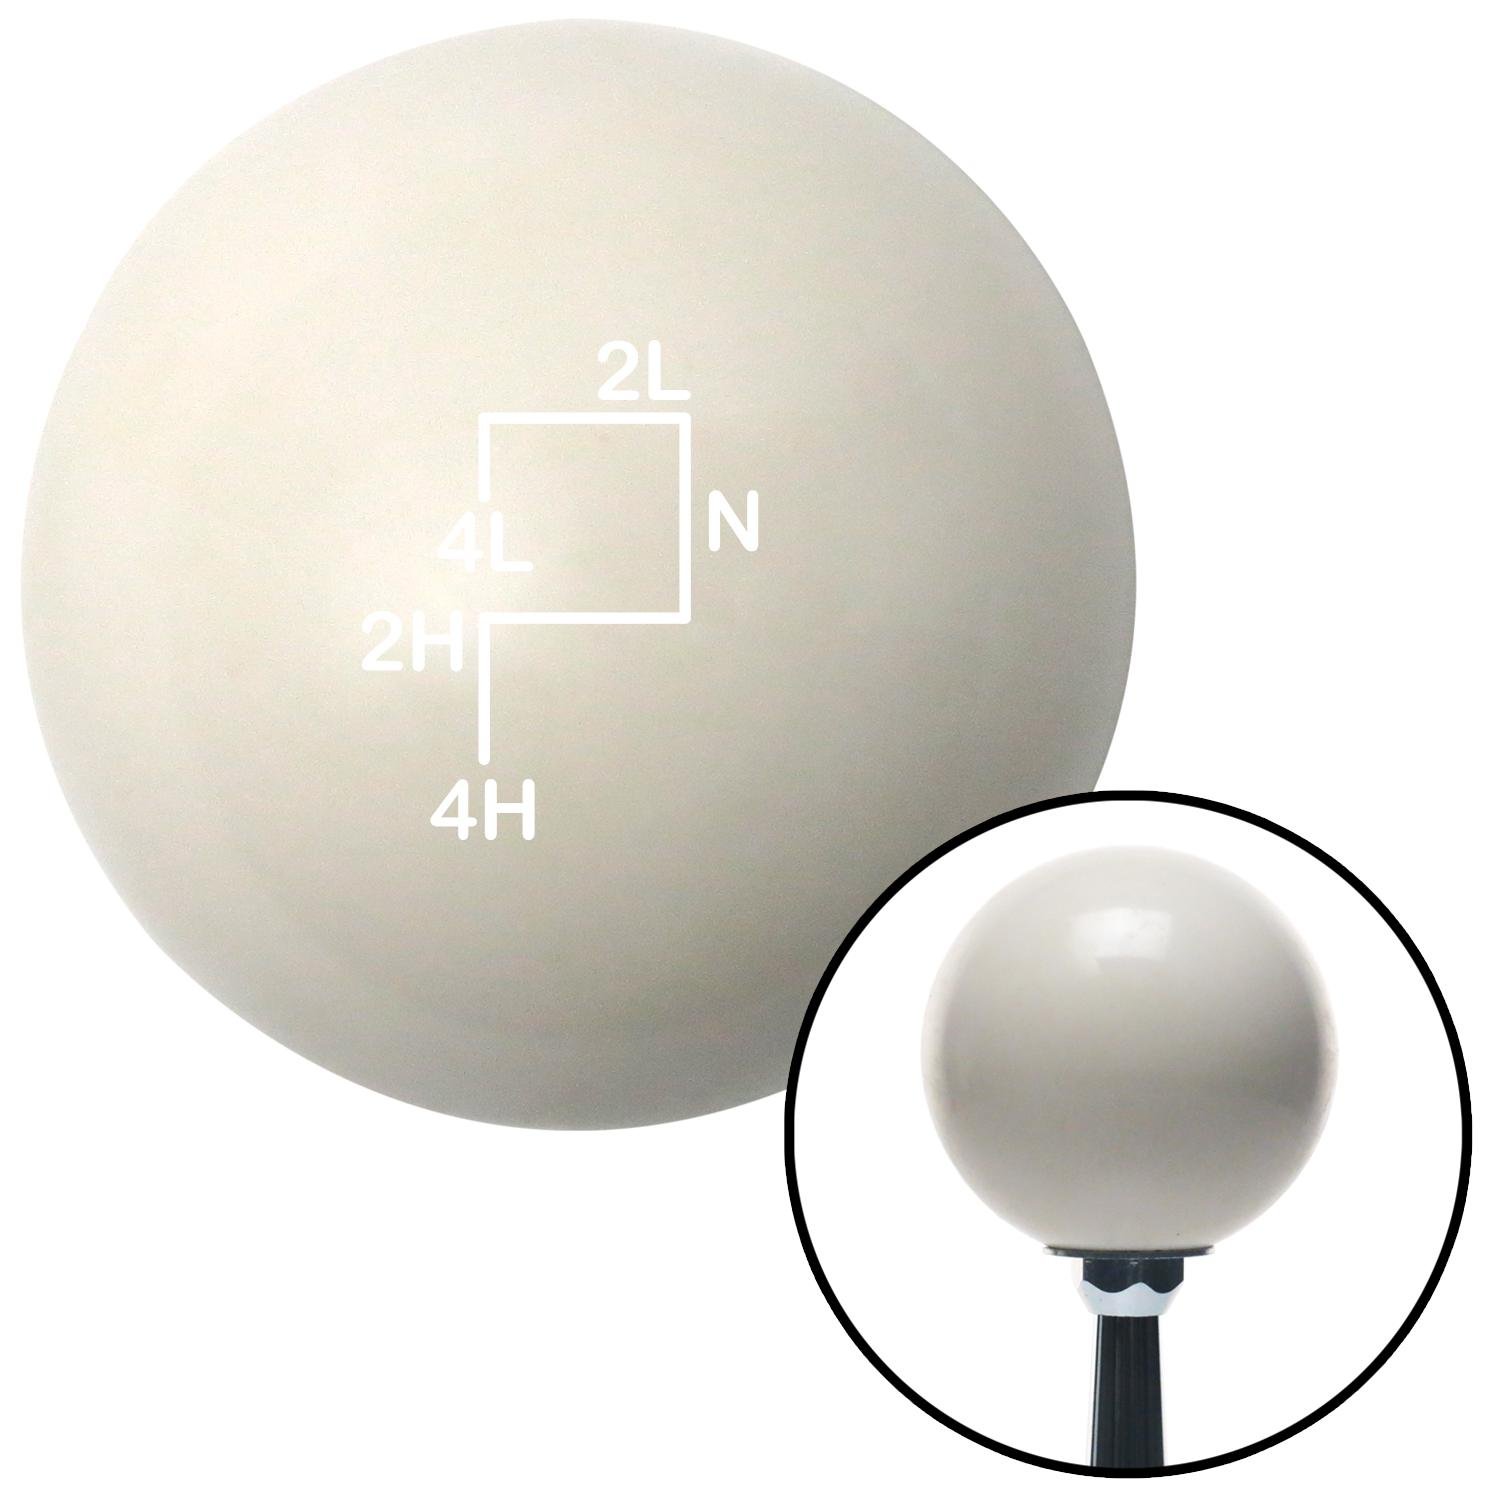 American Shifter 76591 Ivory Shift Knob with M16 x 1.5 Insert White Shift Pattern 39n